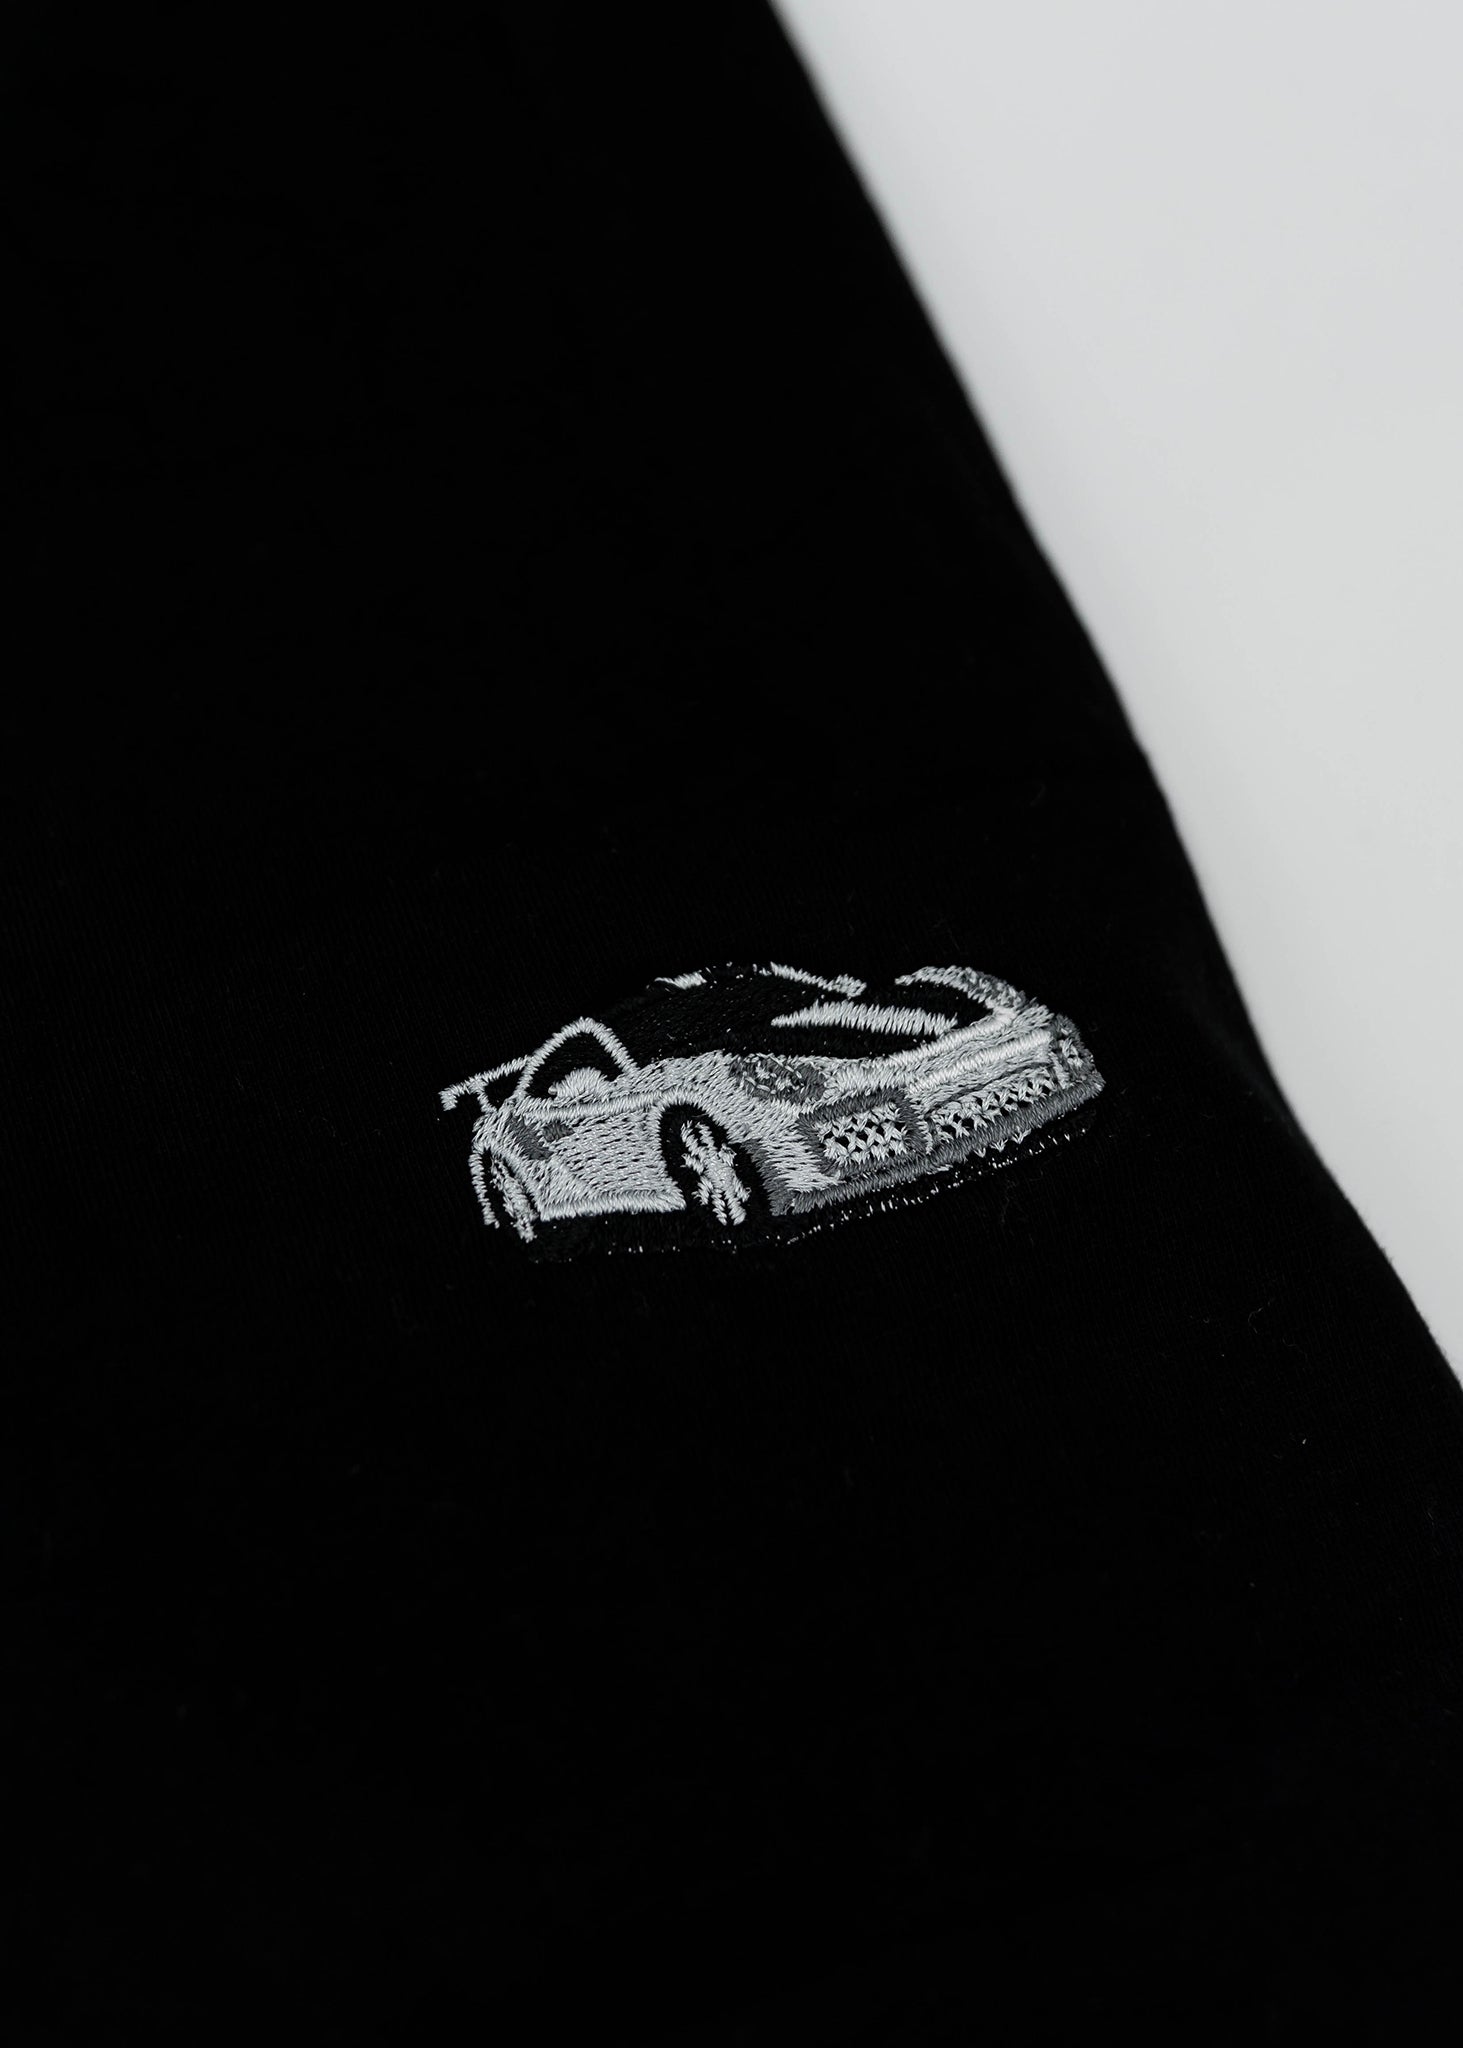 Close up of an embroidered 991.2 GT2 RS on a women's high quality cropped t-shirt. Photo shows the detailed embroidery of a white, silver, and carbon fiber GT2 RS. Fabric composition of this tee is 100% cotton. The material is very soft, stretchy, and non-transparent. The style of this tshirt is a crewneck, short sleeve, cropped at the waist, with embroidery on the left chest.